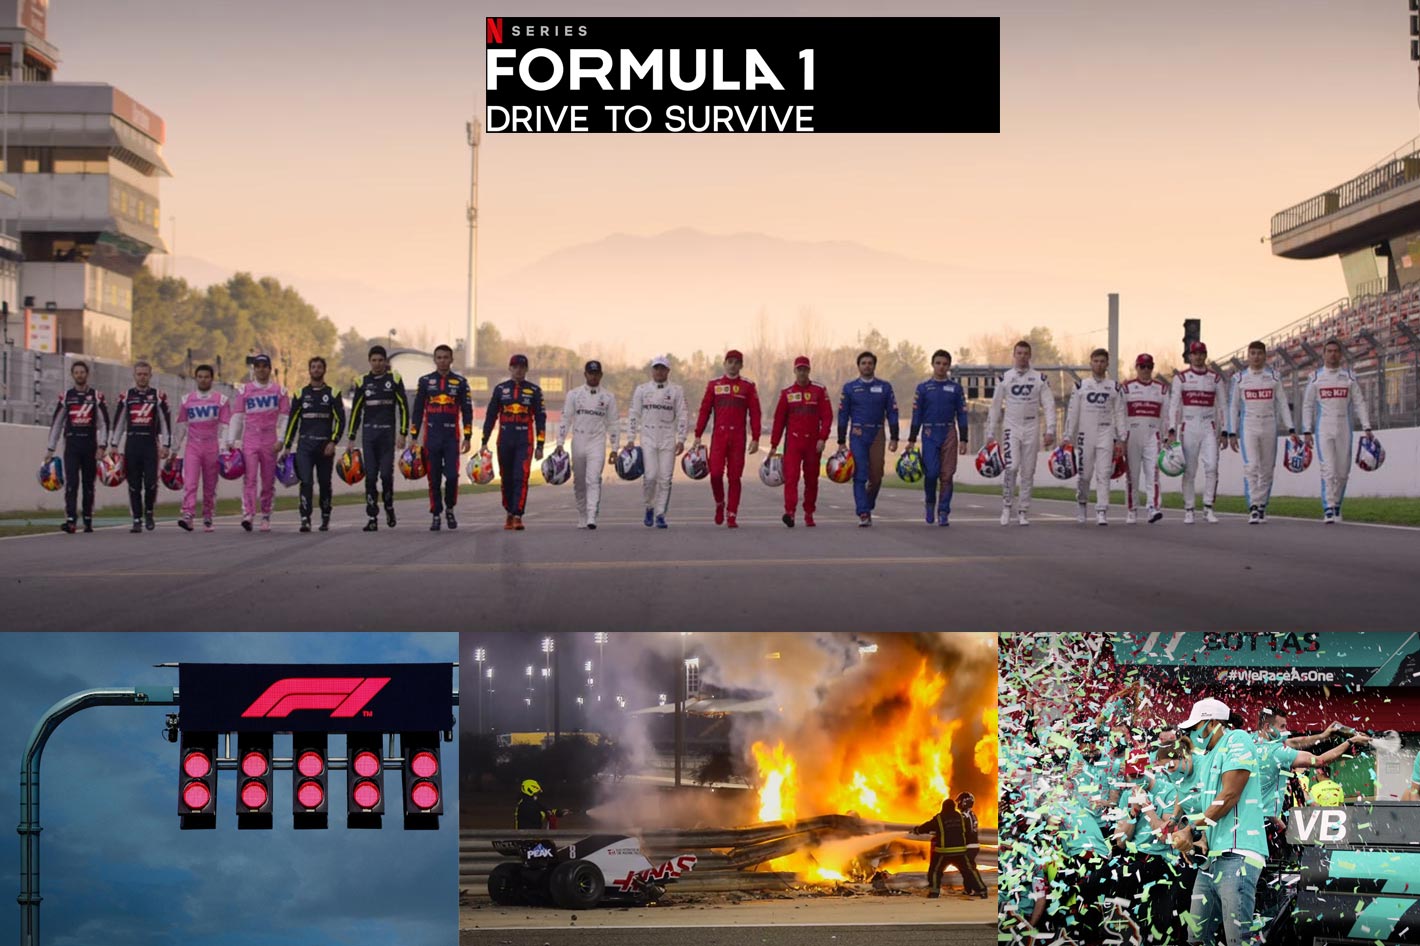 Formula 1 is back, so is Netflix's documentary Drive to Survive by